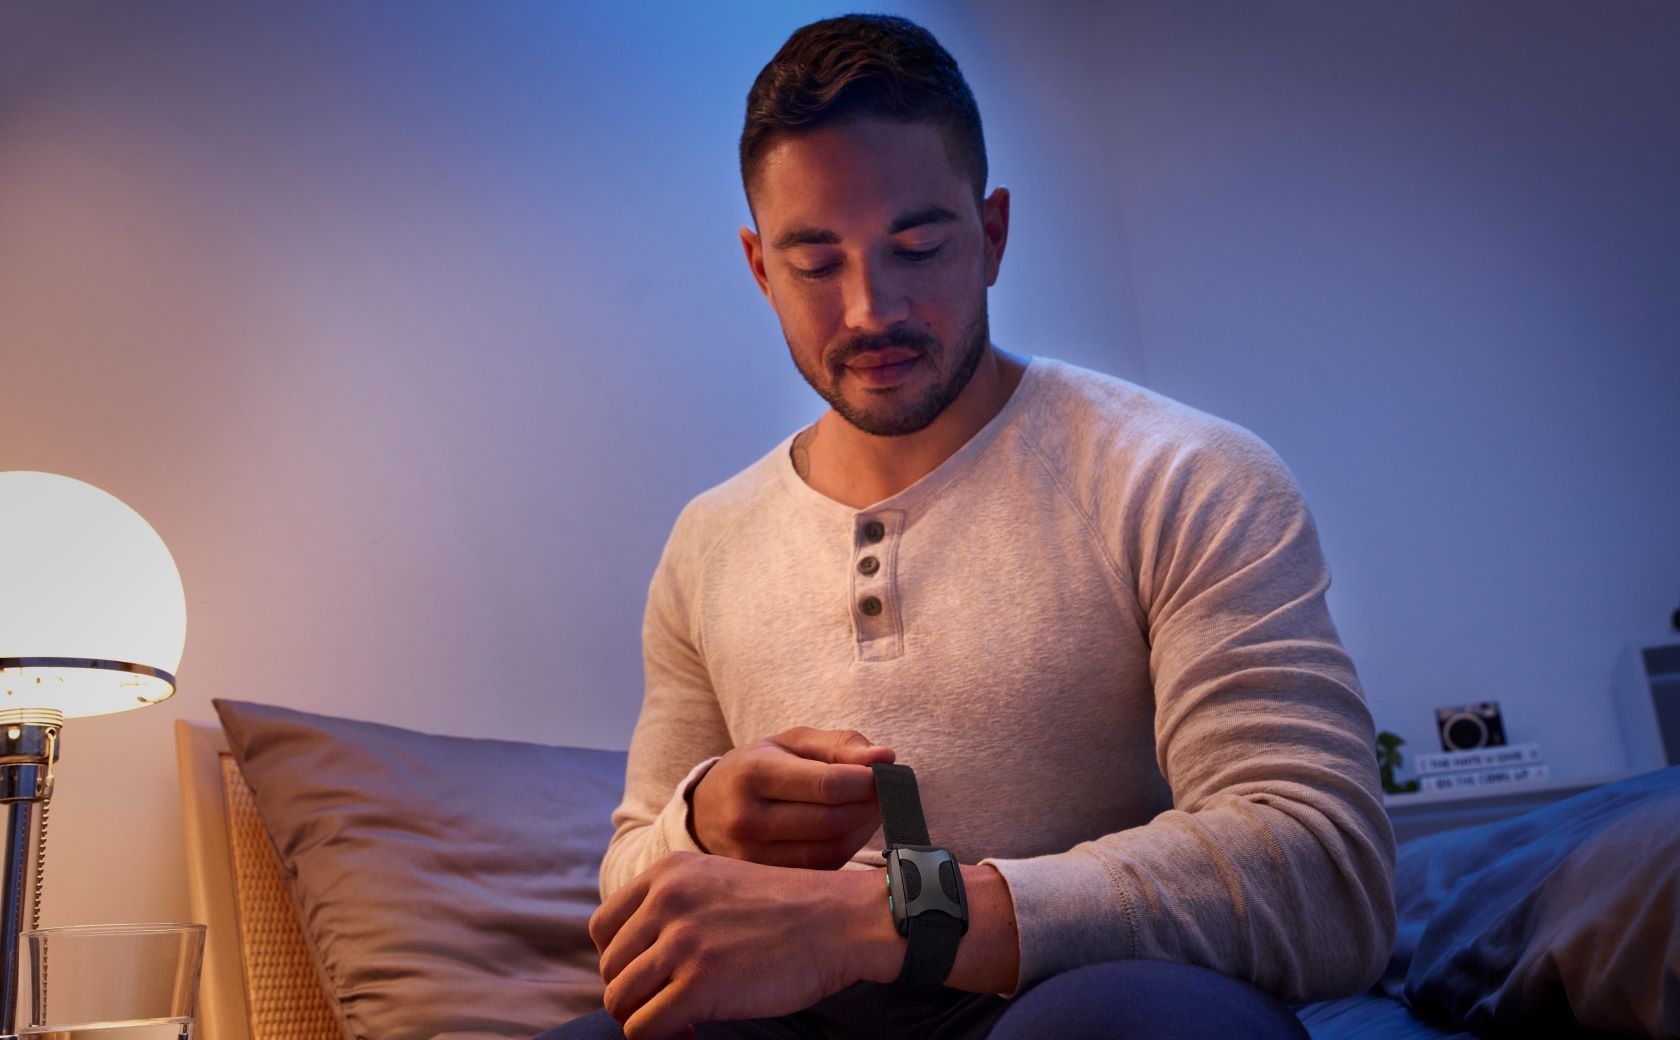 Person Putting On Apollo Wearable at Bedtime